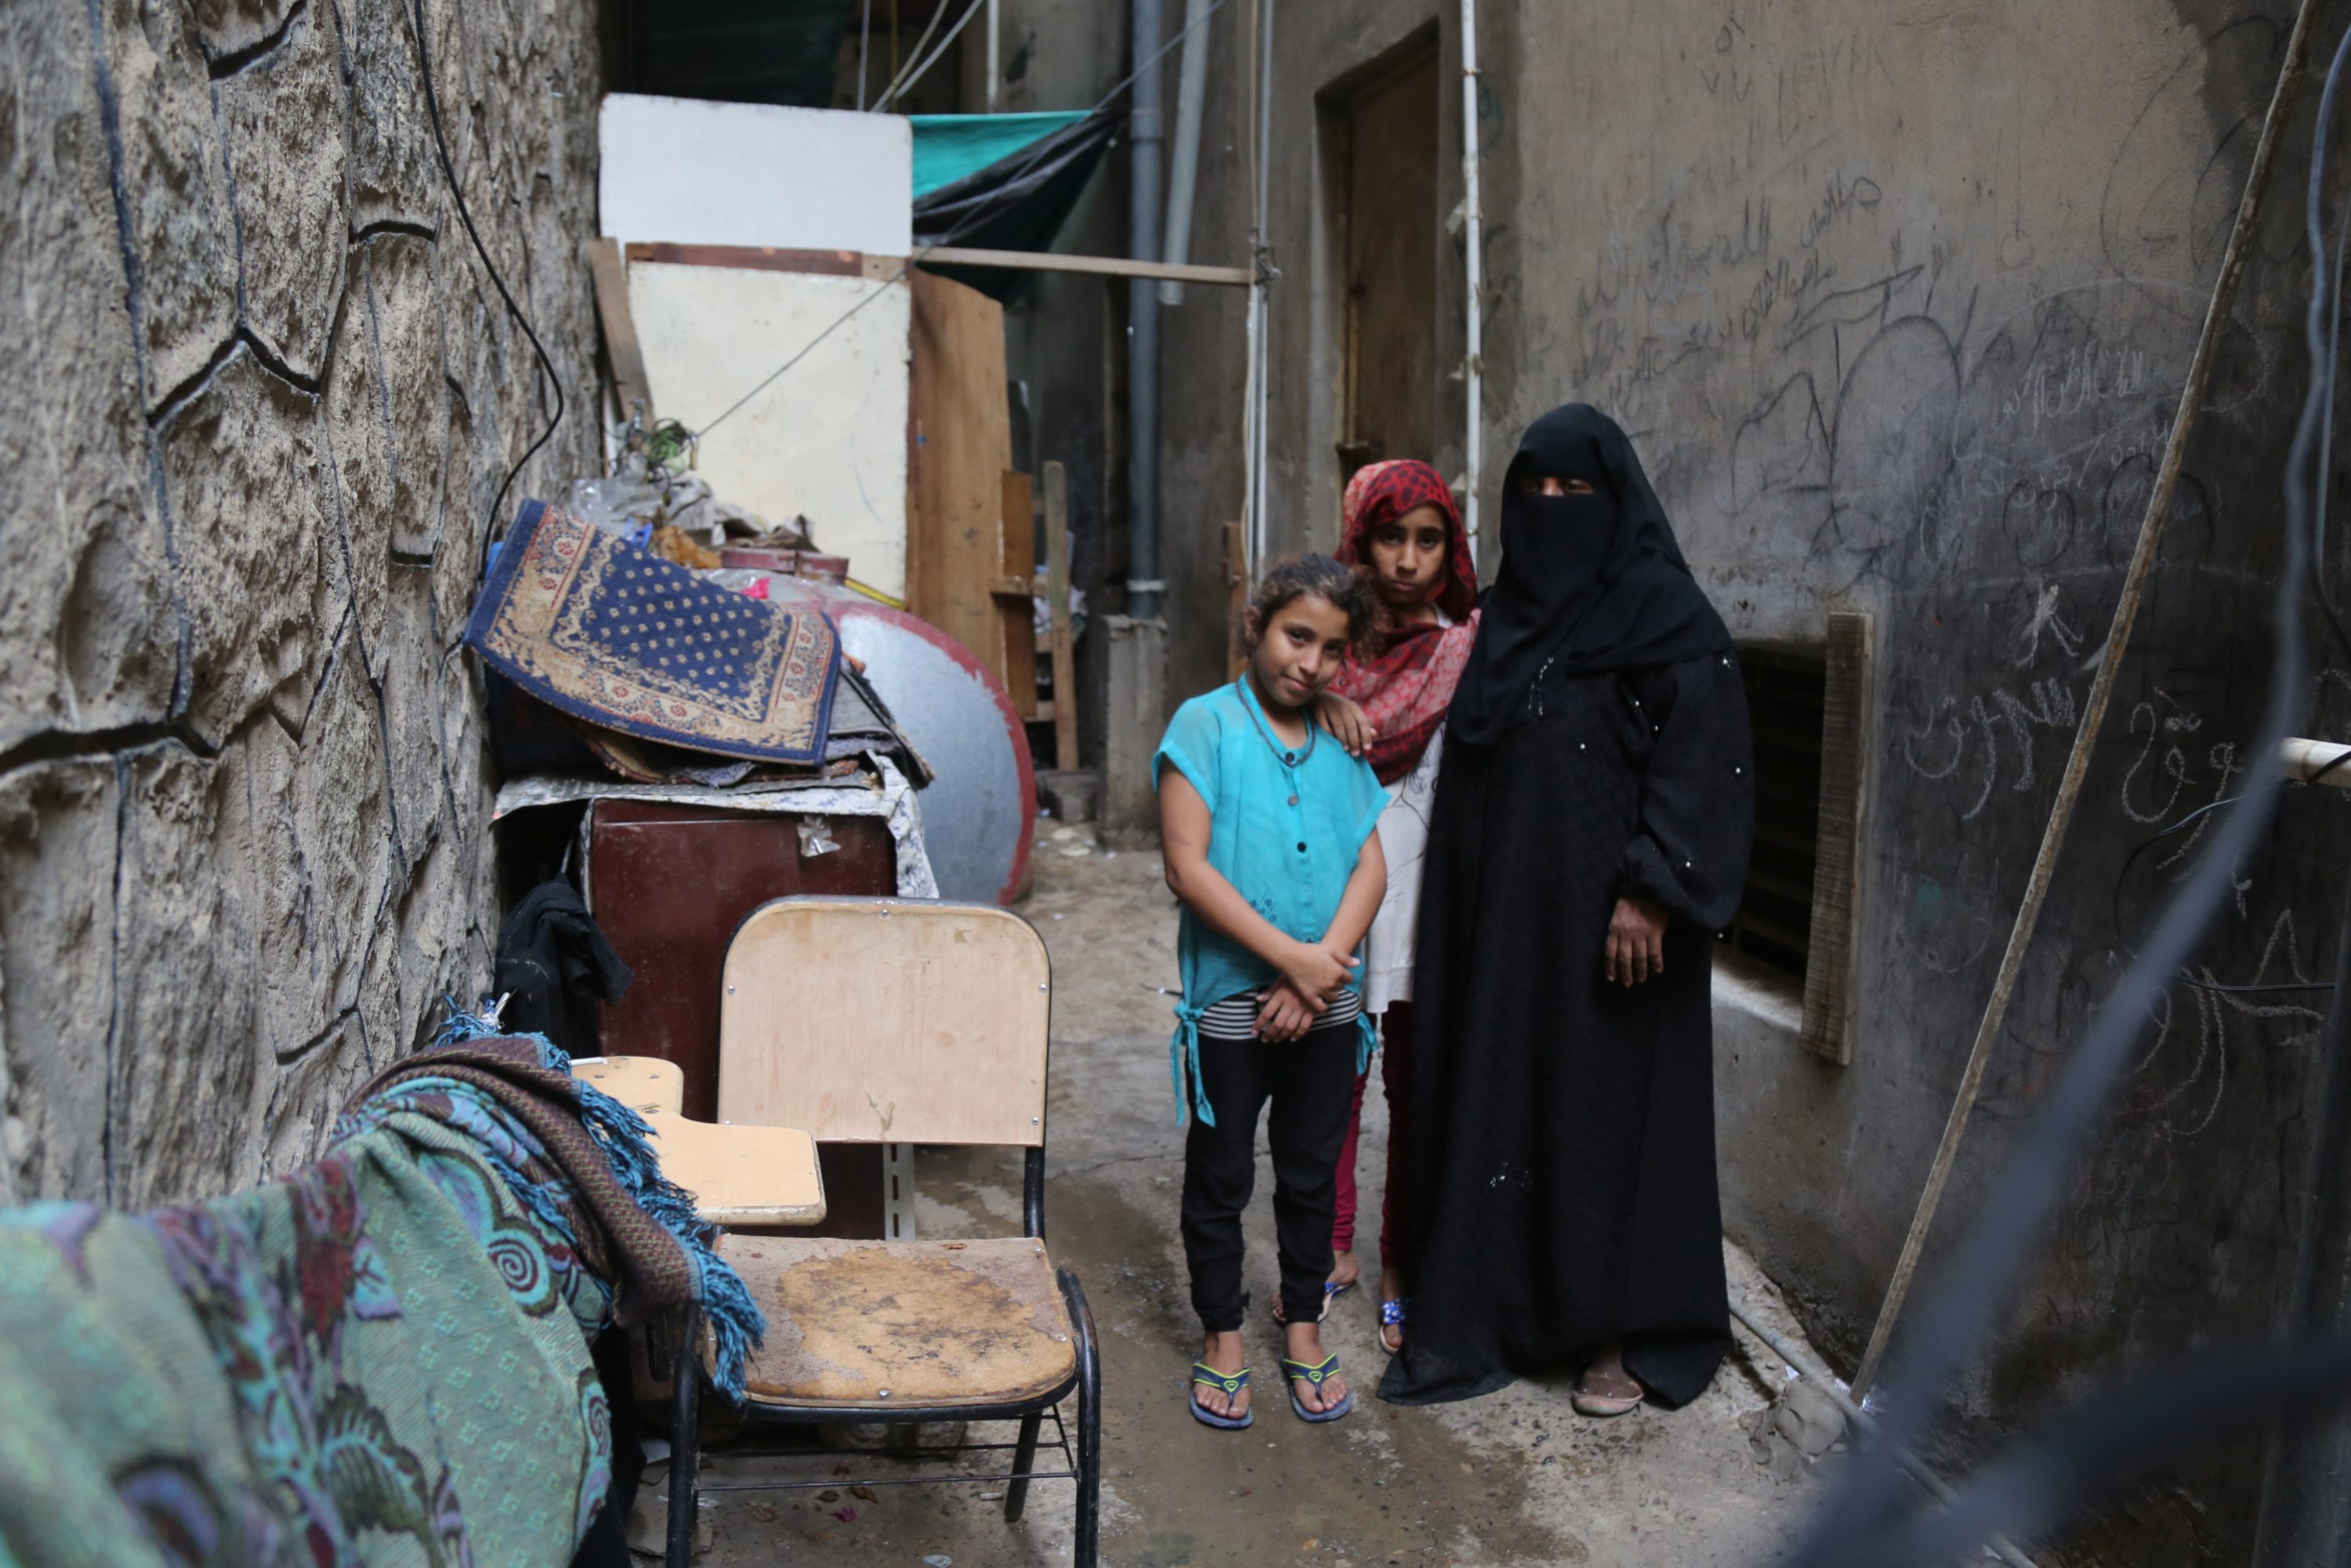 Sama, left, her aunt Thikra, right, and one of Sama's sisters. Thikra has taken in the five sisters after their parents died. (MEE/ Khalid al-Banna)